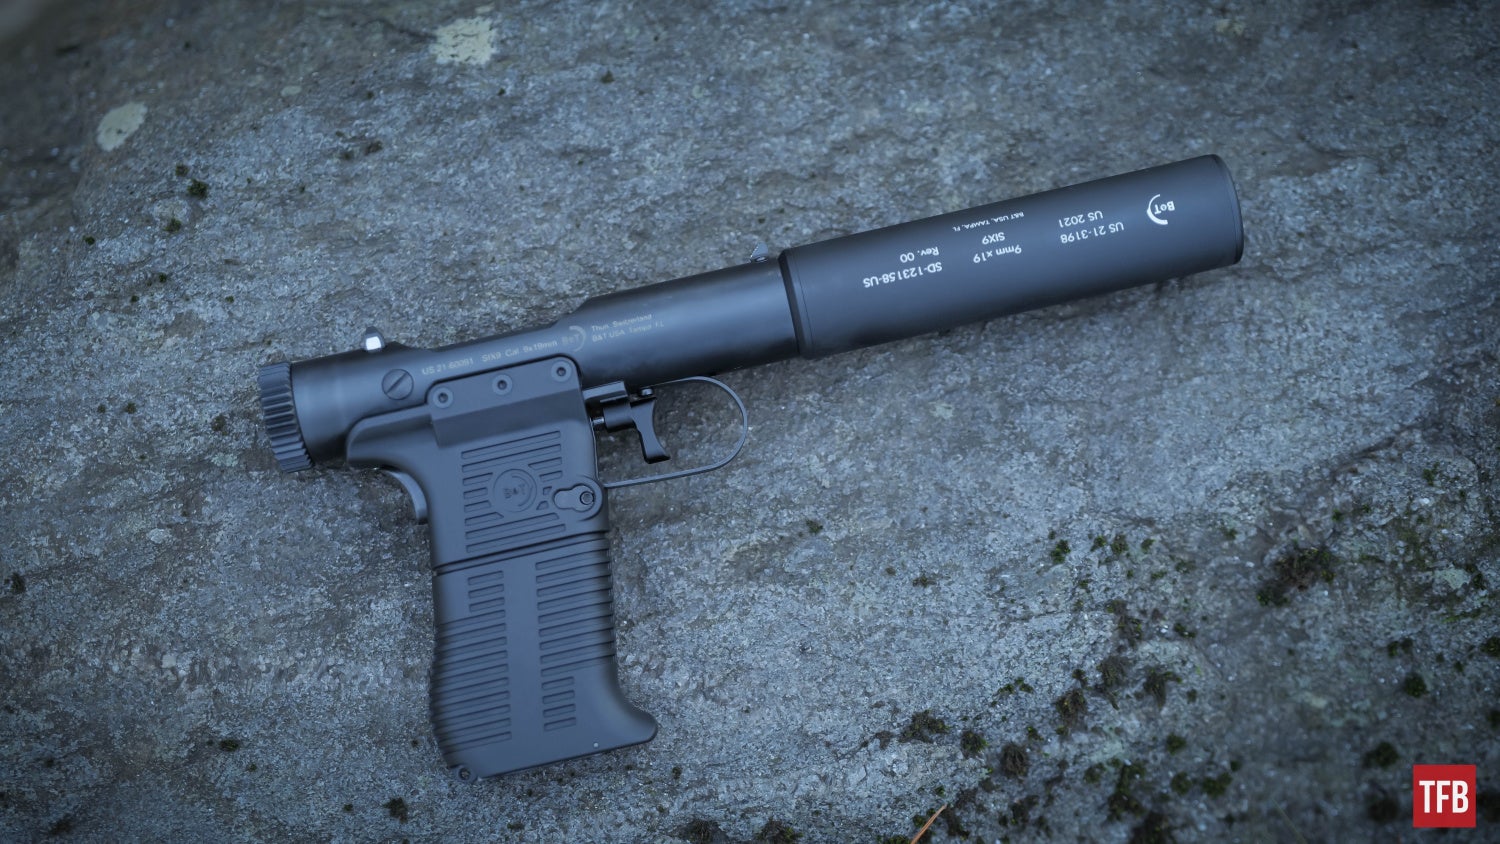 SILENCER SATURDAY #216: The B&T USA STATION SIX9 Pistol And Suppressors